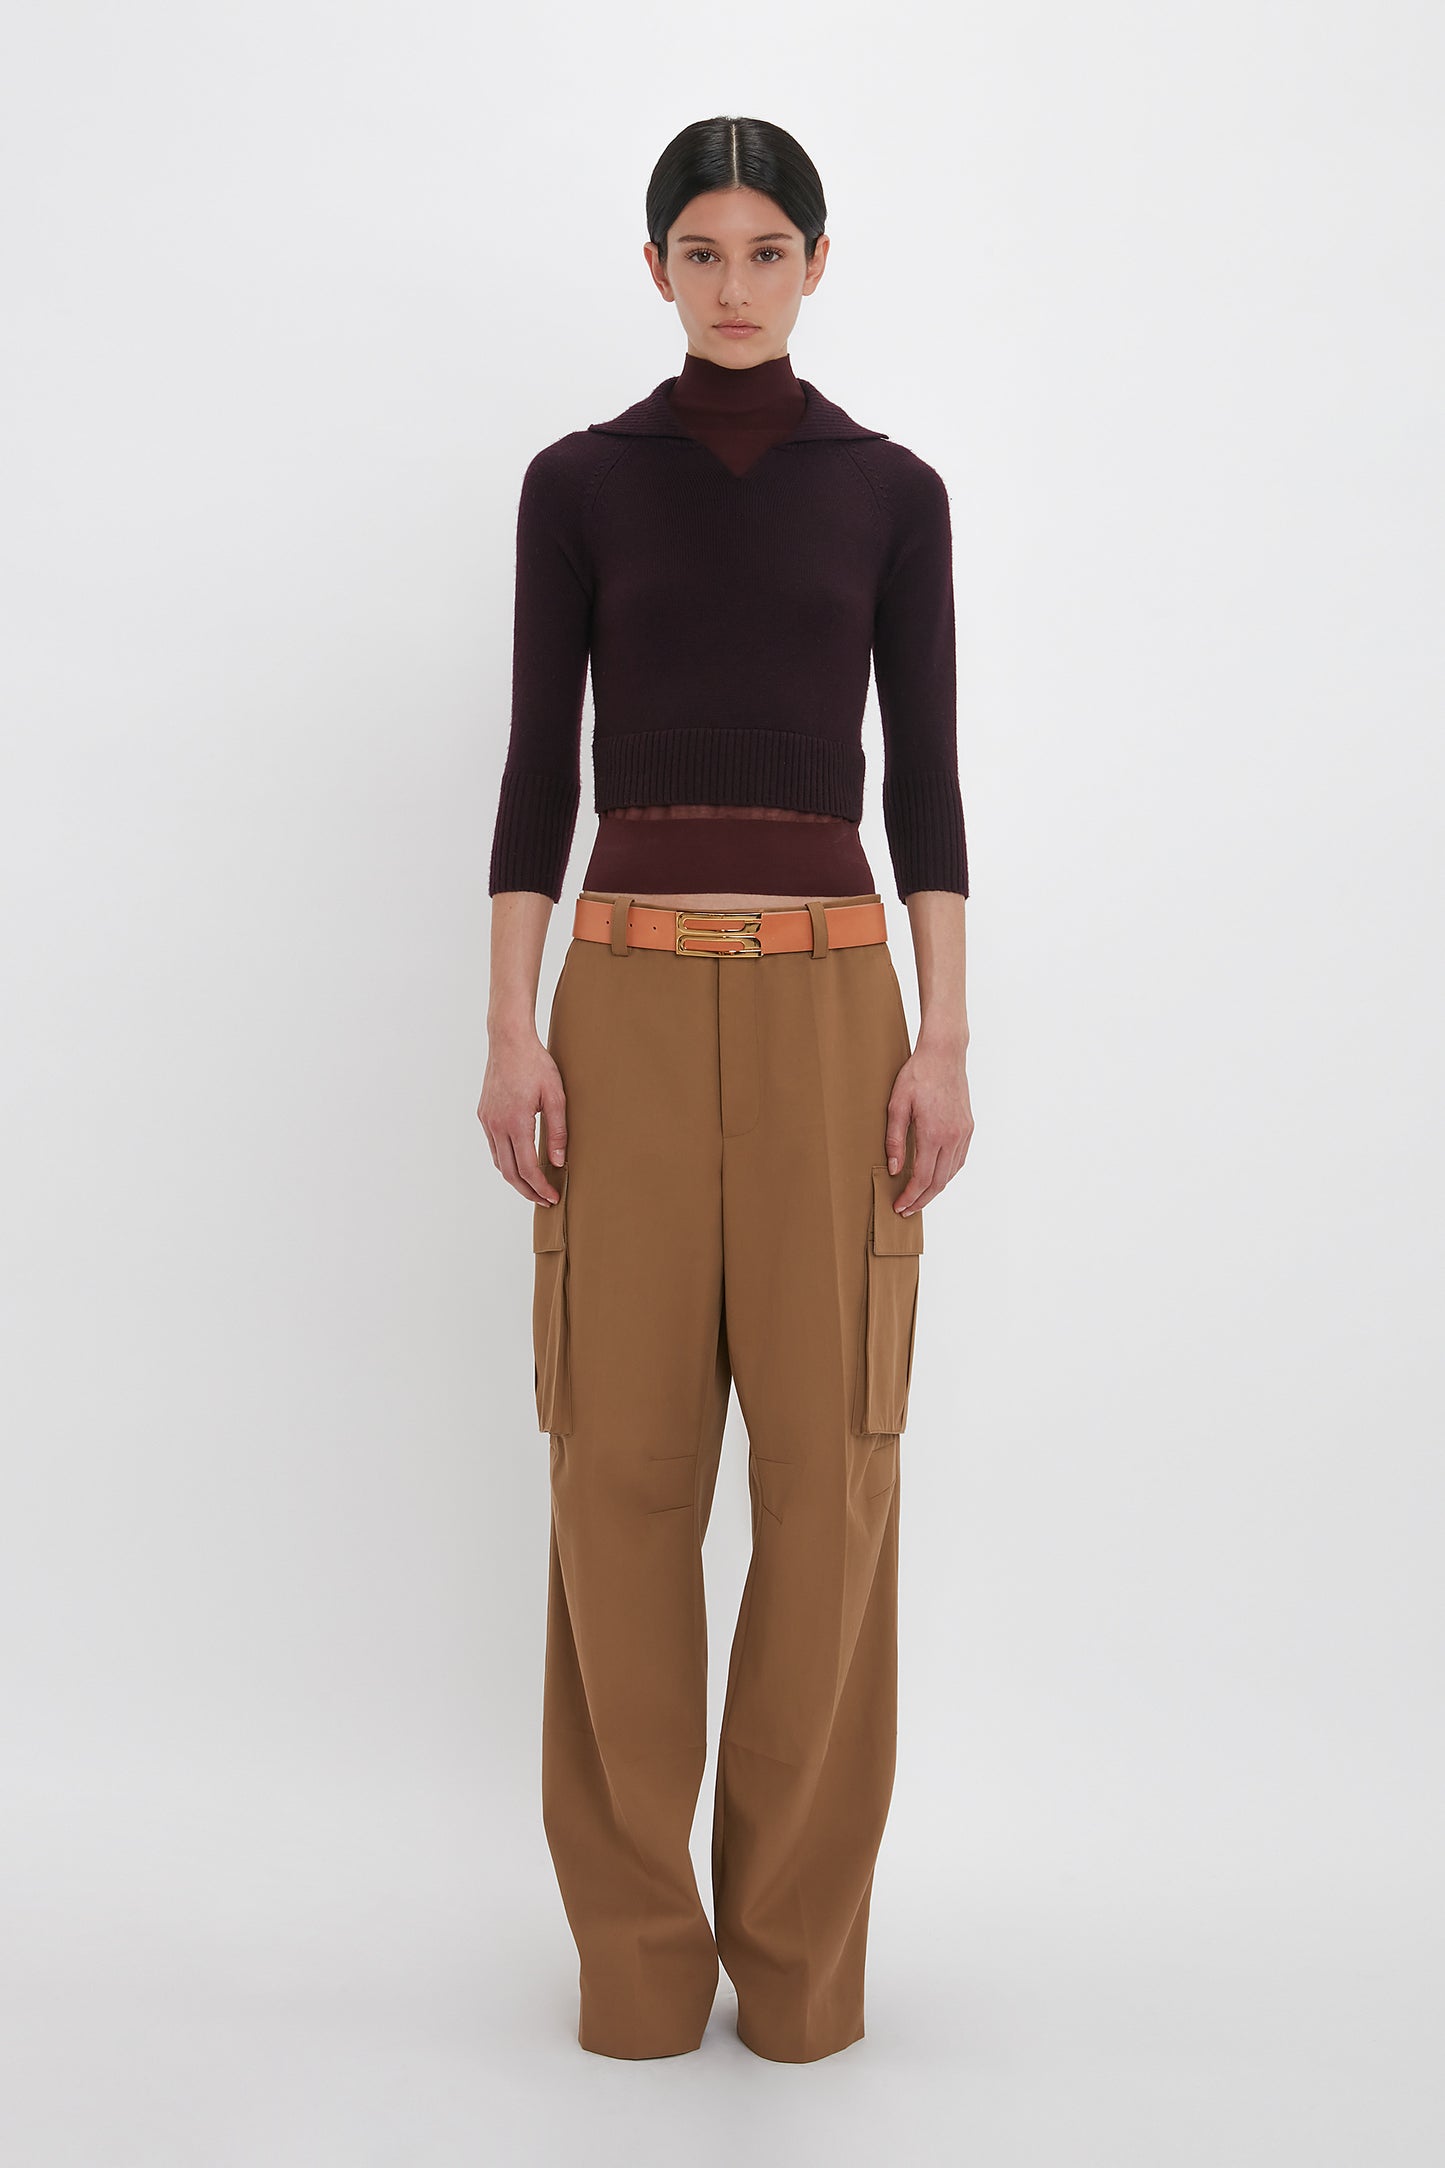 A person stands against a plain white background, wearing the Victoria Beckham Wrap Detail Jumper In Brown, tan high-waisted cargo pants, and a brown belt. They have a neutral expression and their hair is pulled back. The ensemble evokes the sophisticated style of Victoria Beckham.